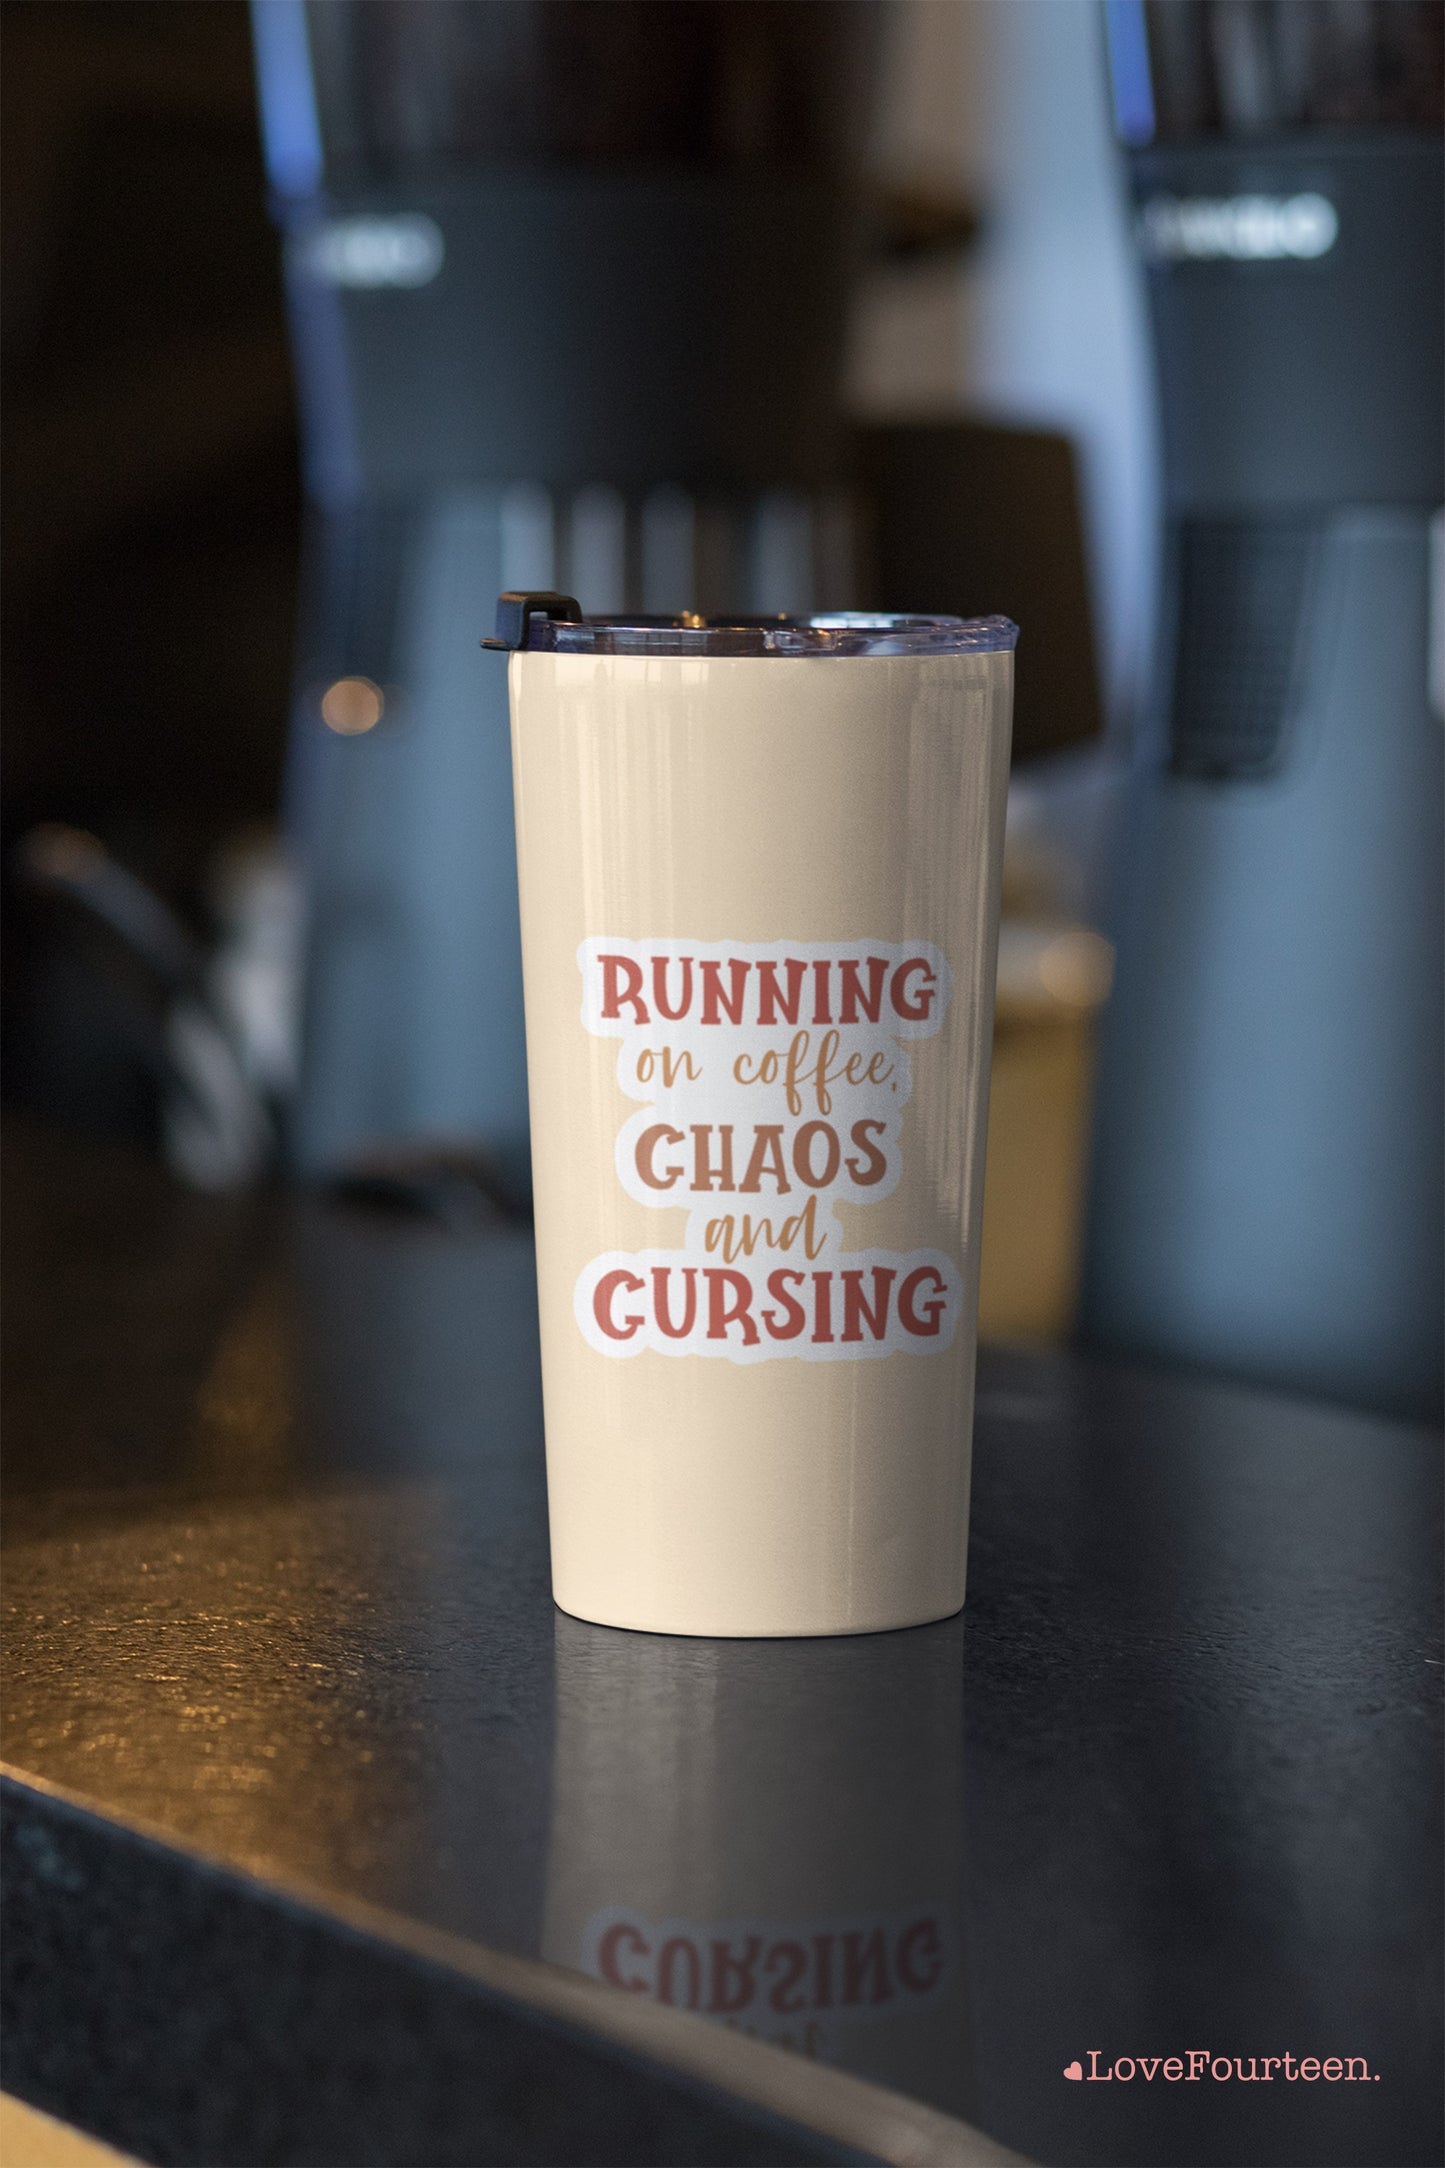 Running on coffee, chaos and cursing - Waterproof Die Cut Sticker